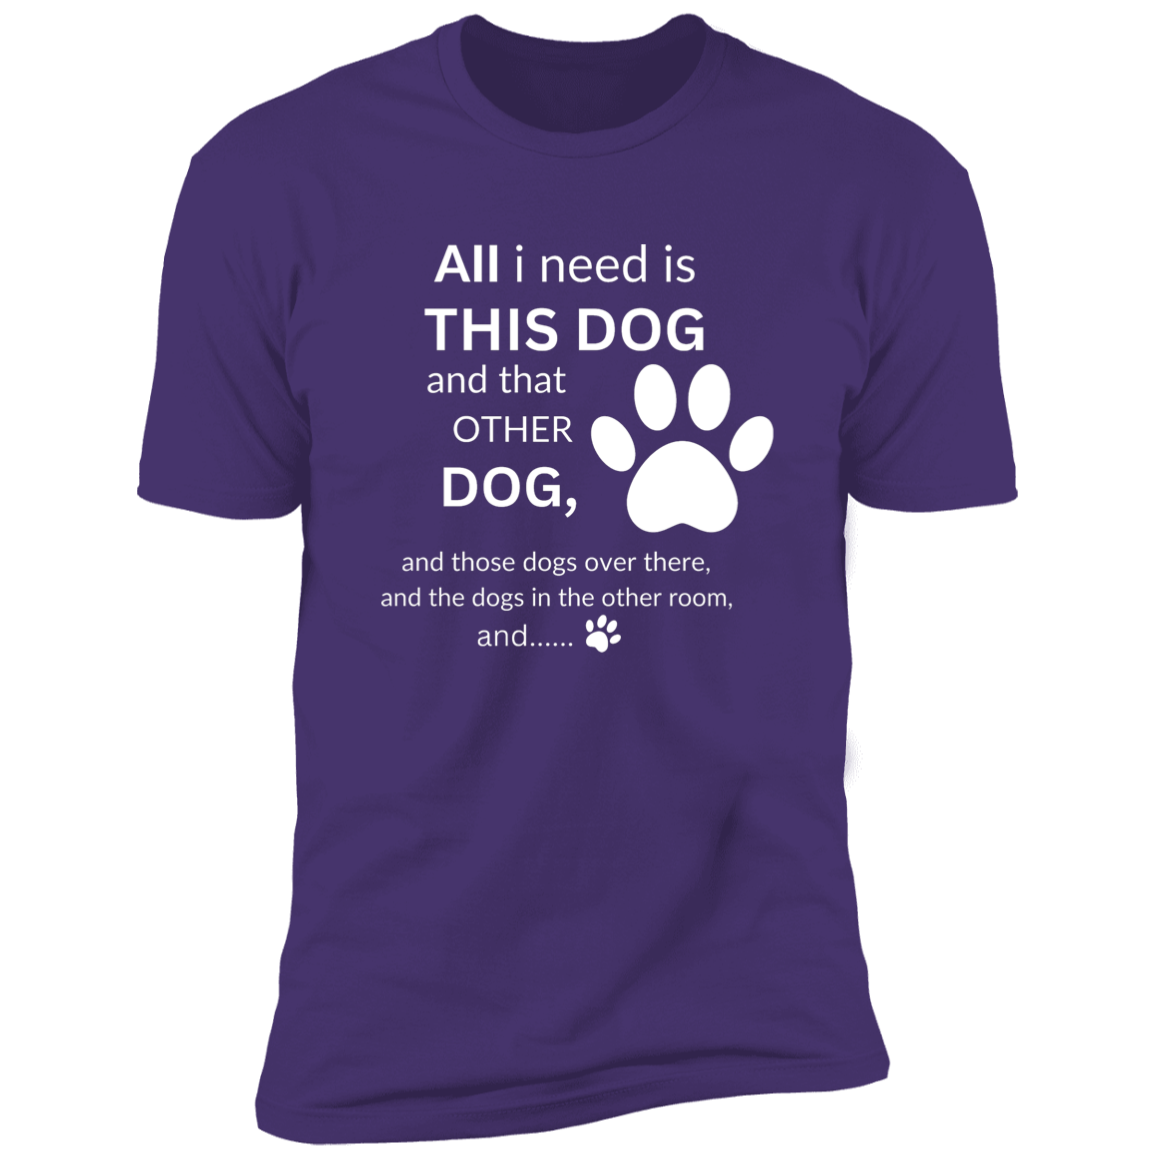 Unisex All I need is this dog t-shirt